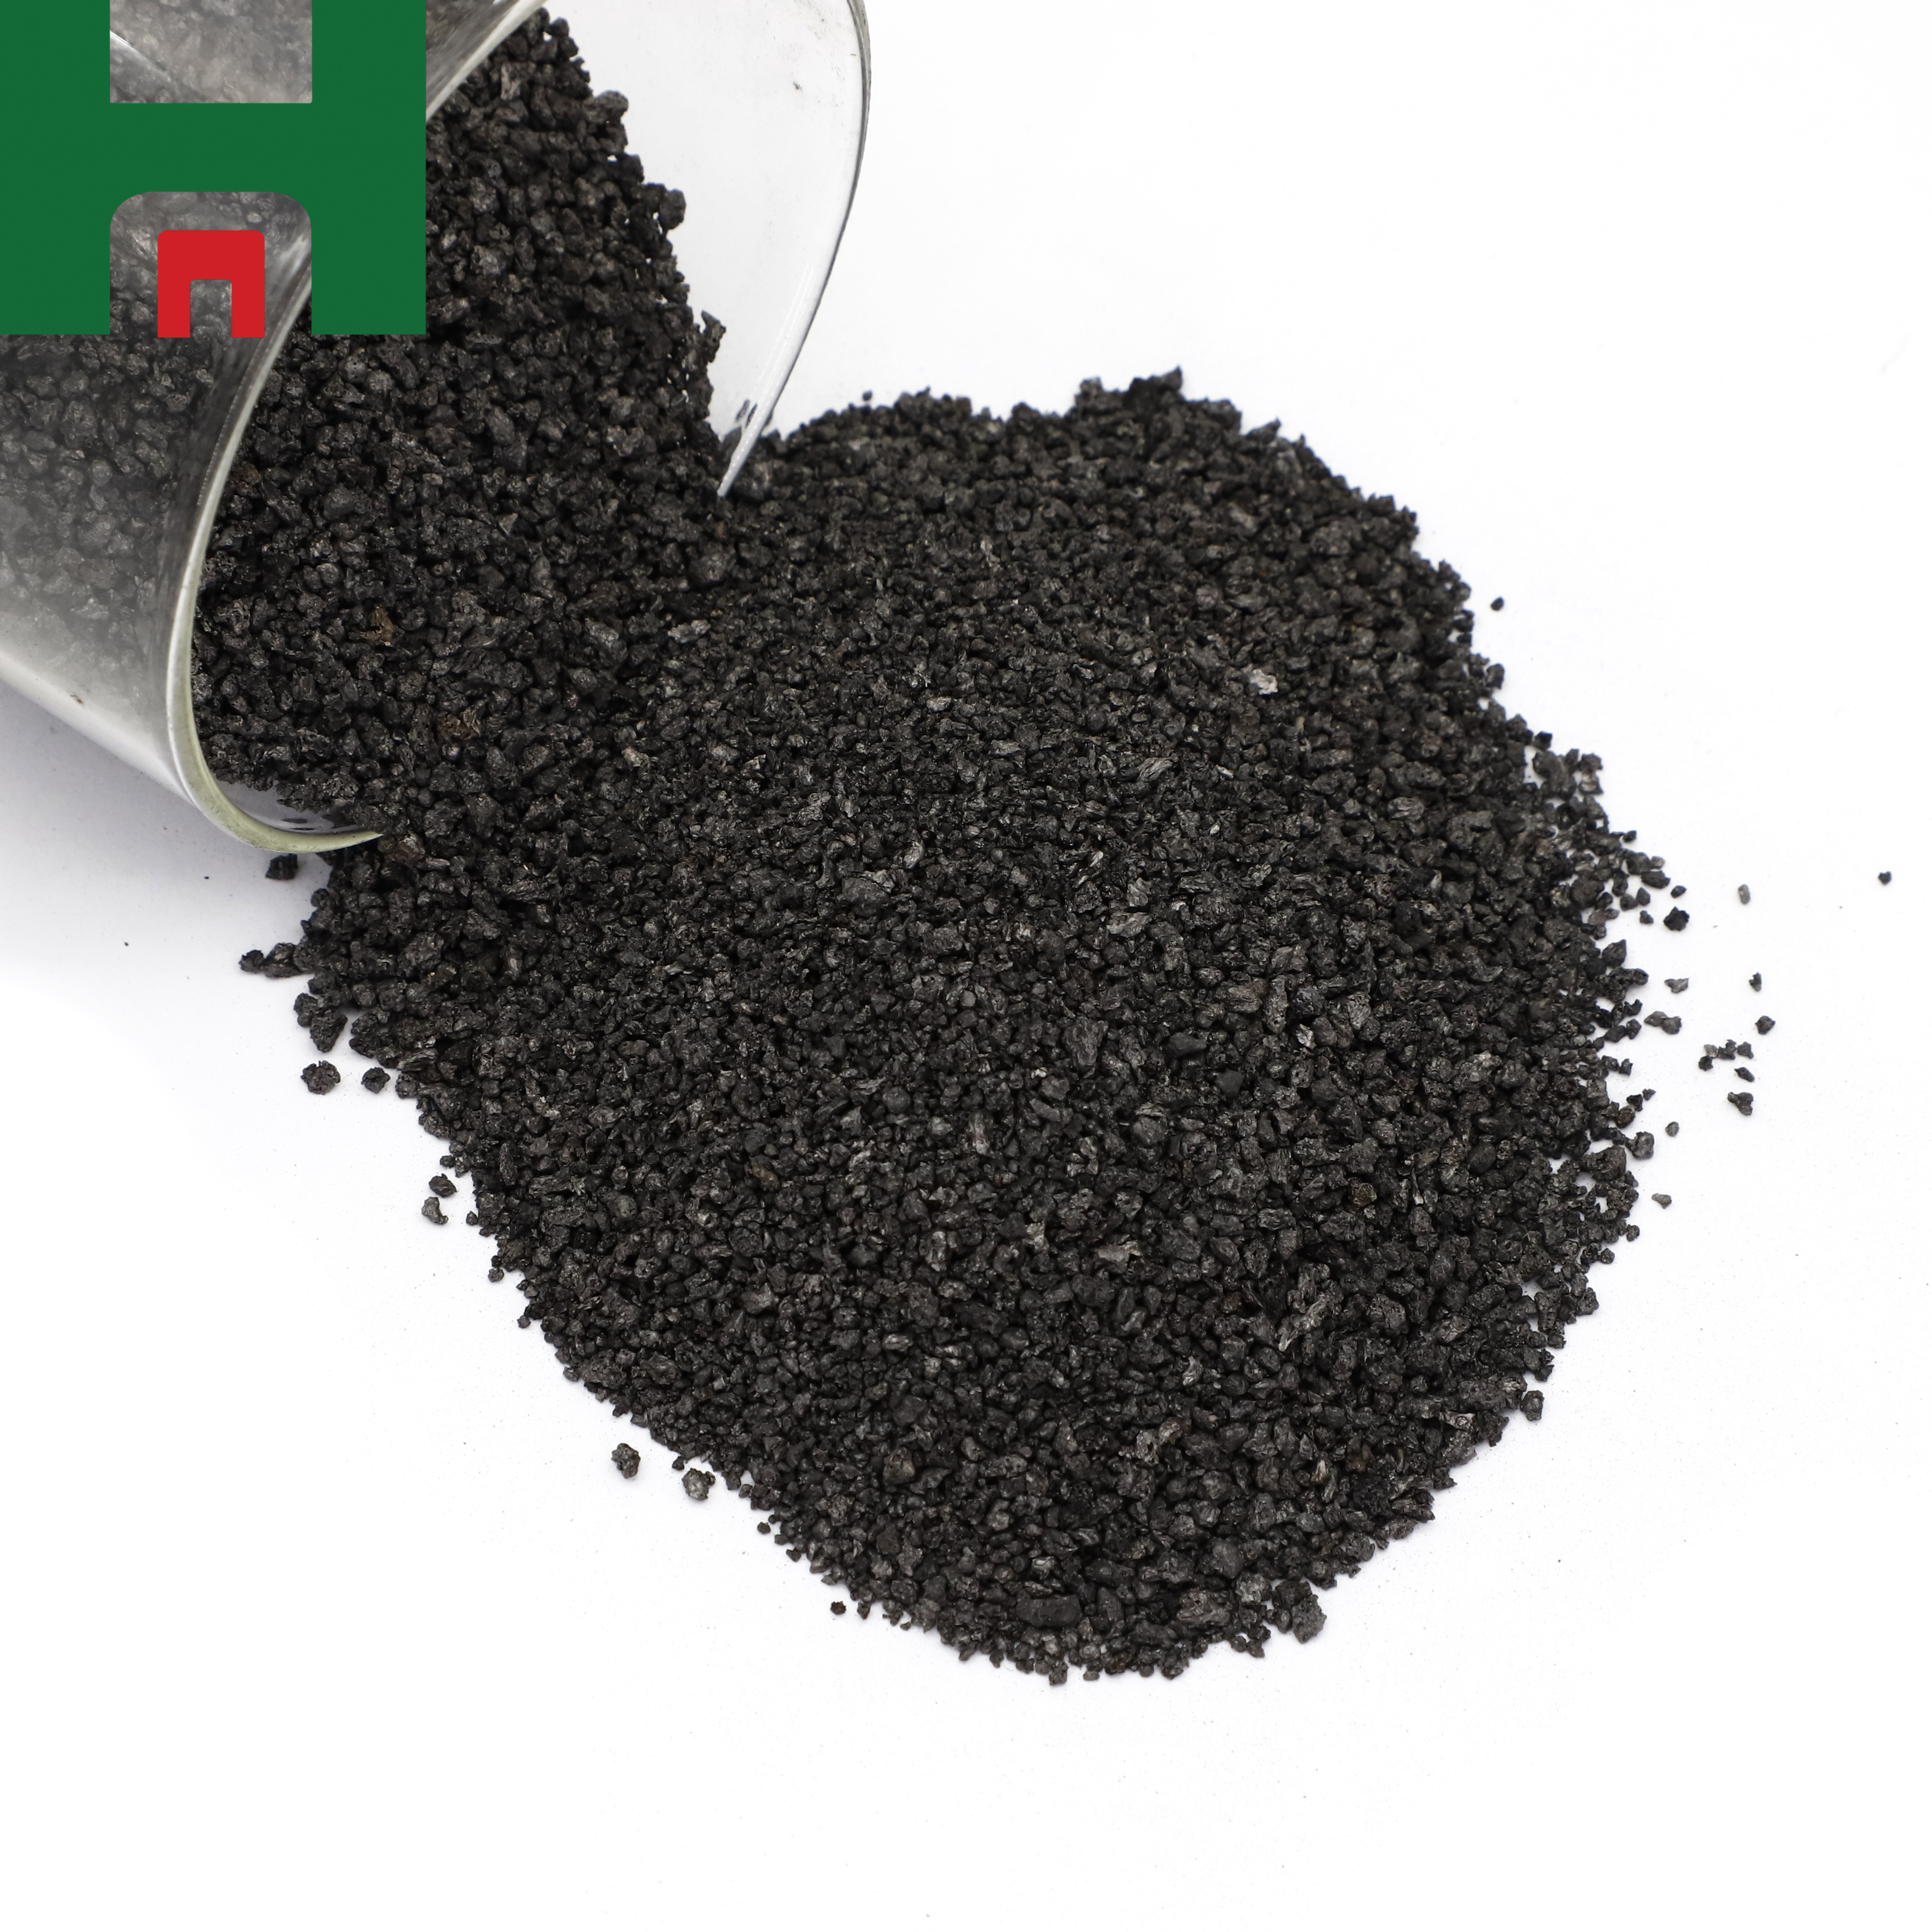 silicon carbide is widely used in the electronic field